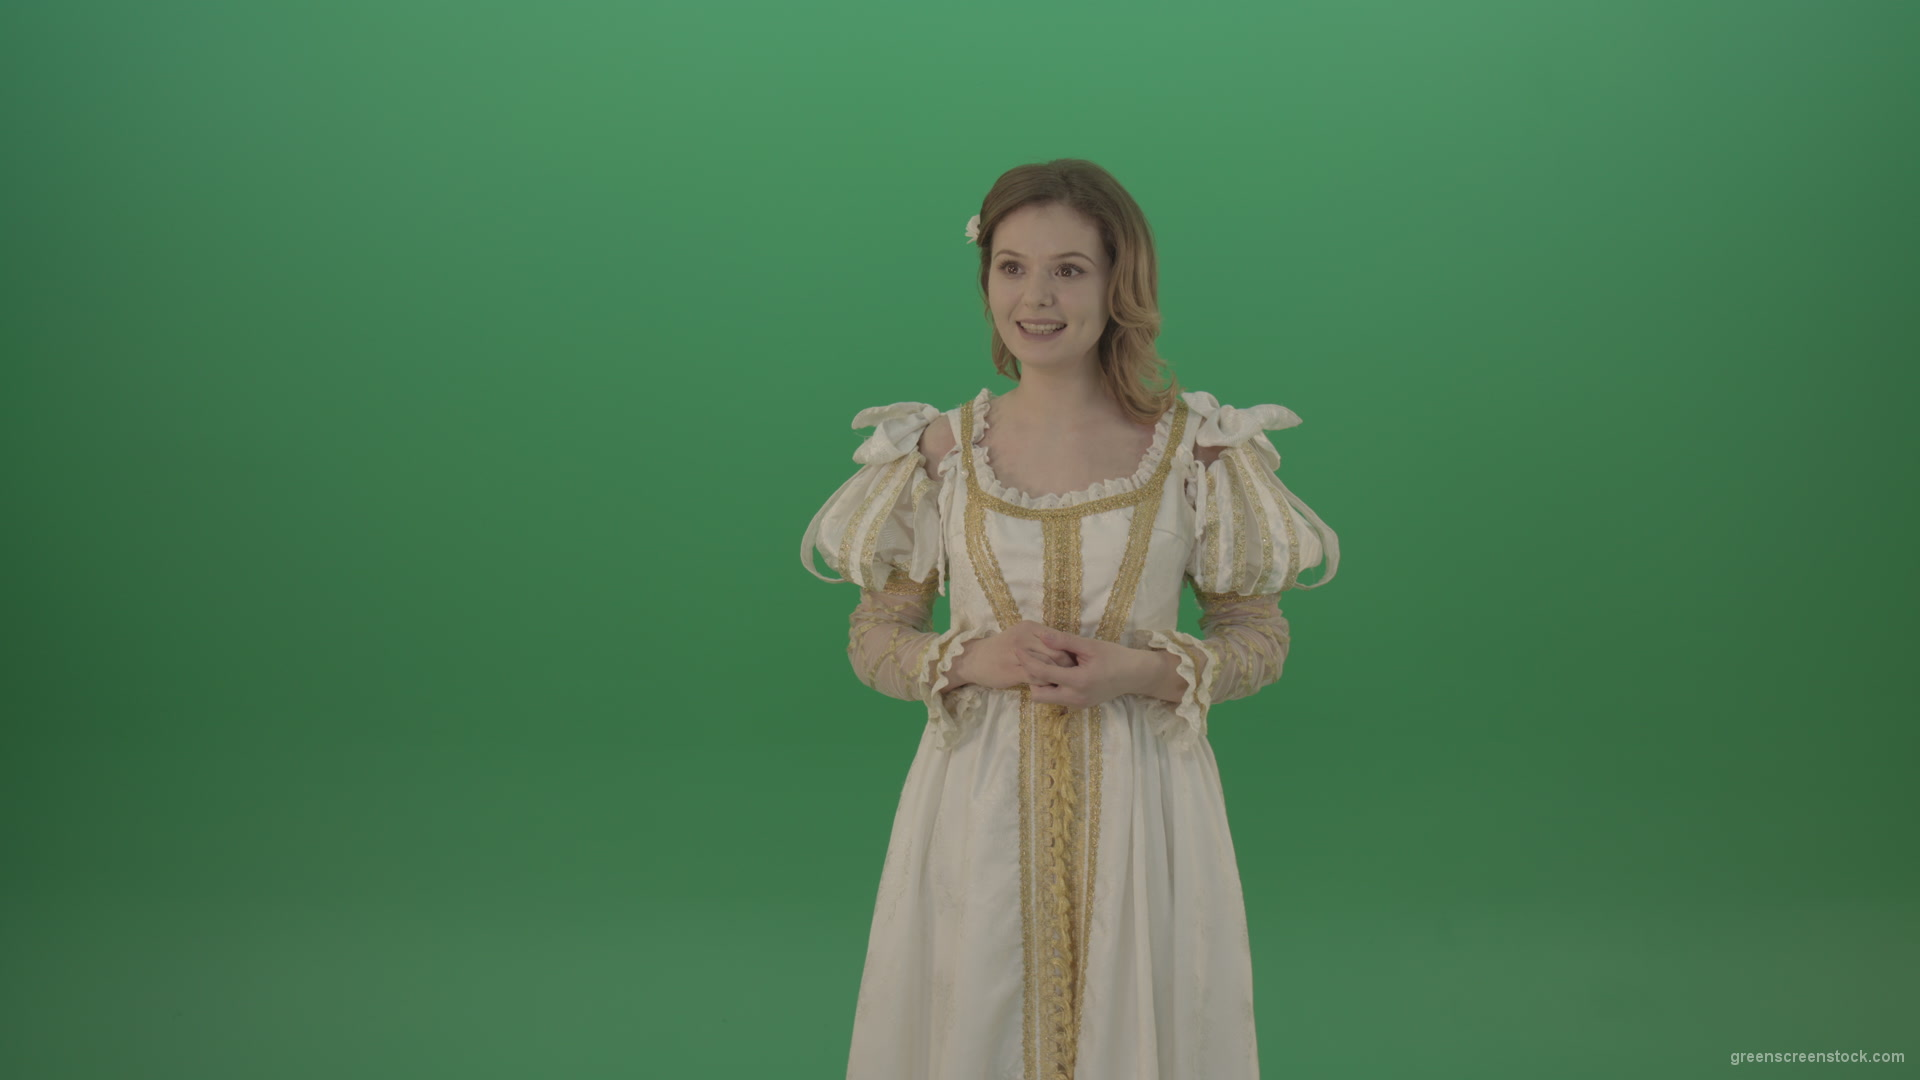 Medieval-girl-in-a-white-suit-looking-far-away-isolated-on-green-background_008 Green Screen Stock